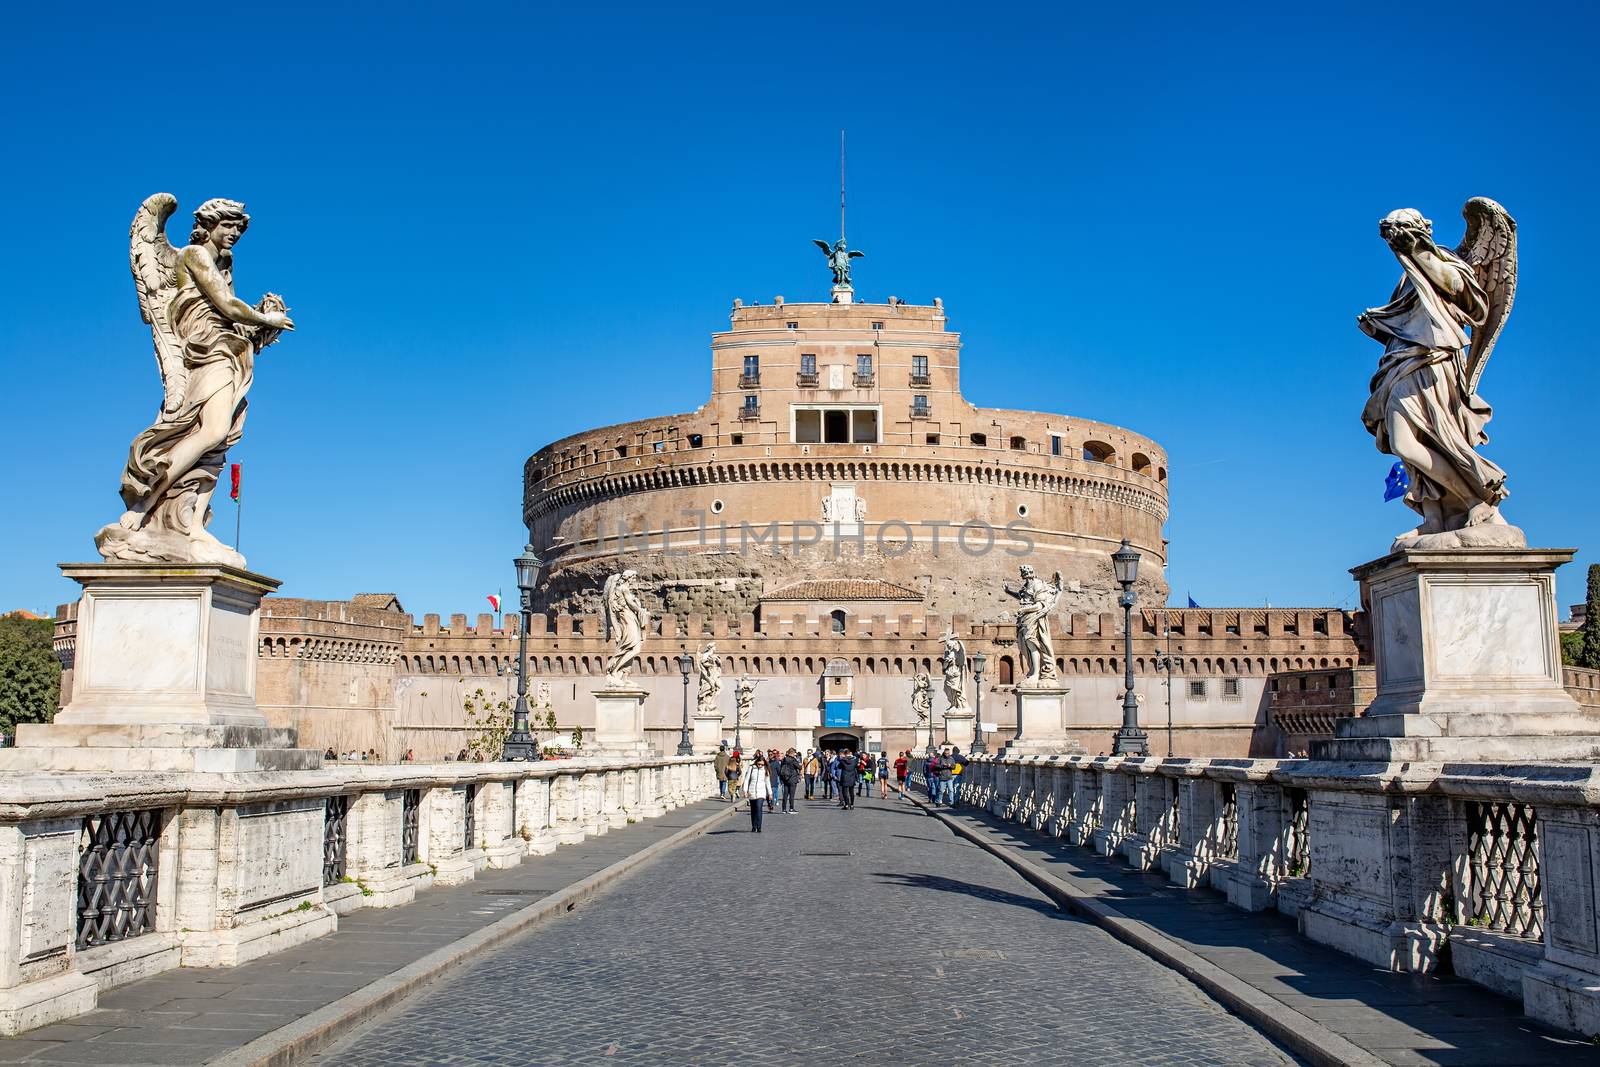 28.02.2020 in Rome, Italy. Frontal view of the Castel Sant'Angelo against the blue sky. Tourists walk nearby